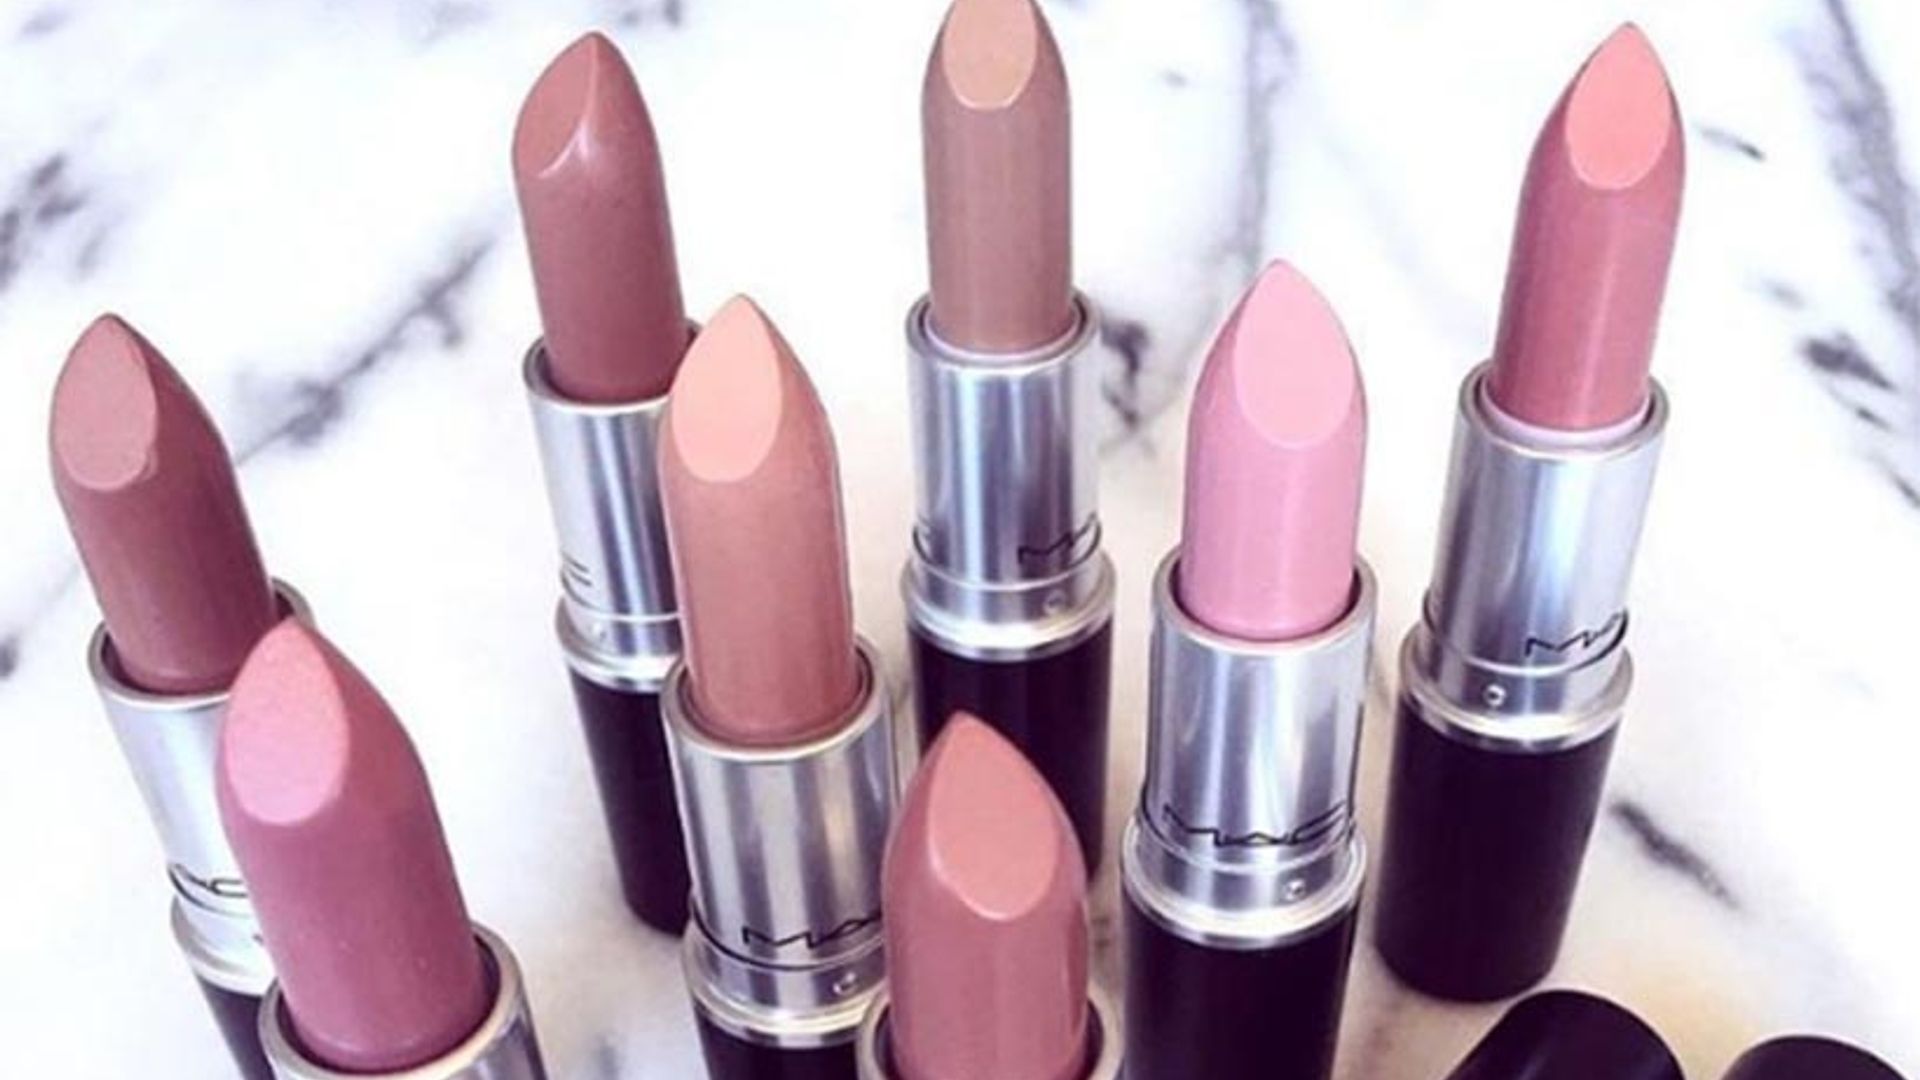 This is how you can get a free MAC lipstick